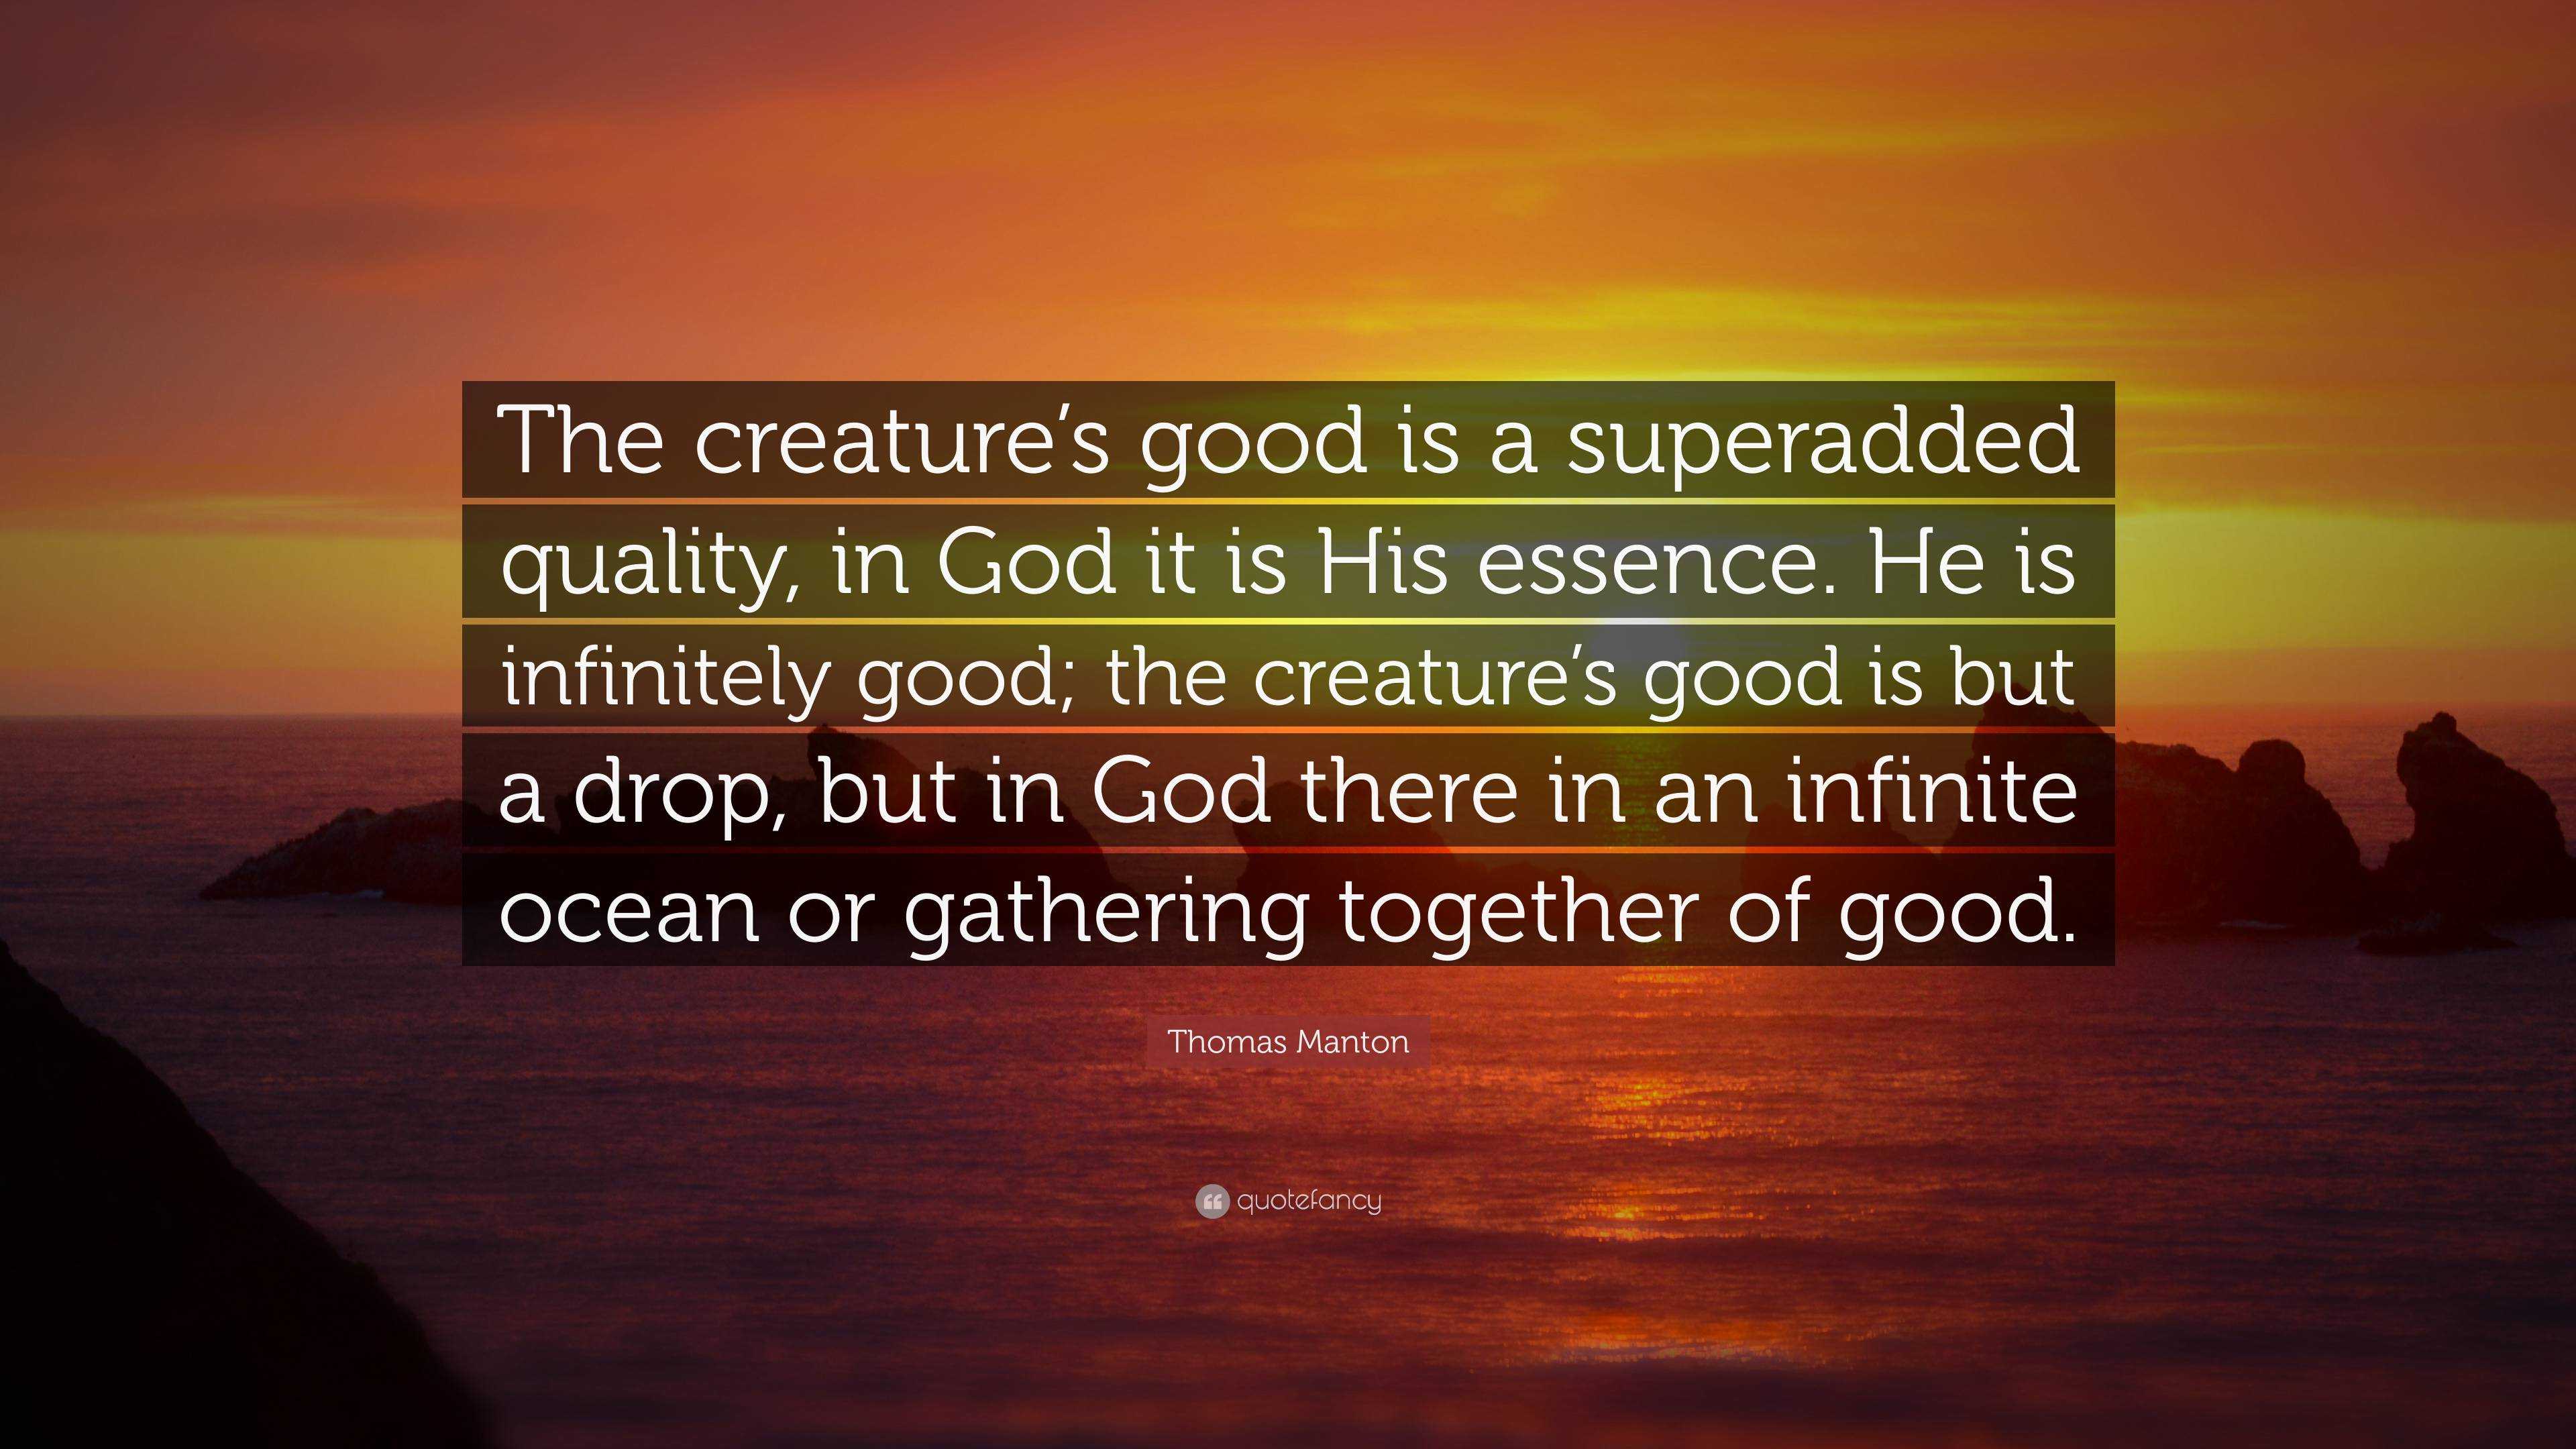 Thomas Manton Quote “The creature’s good is a superadded quality, in